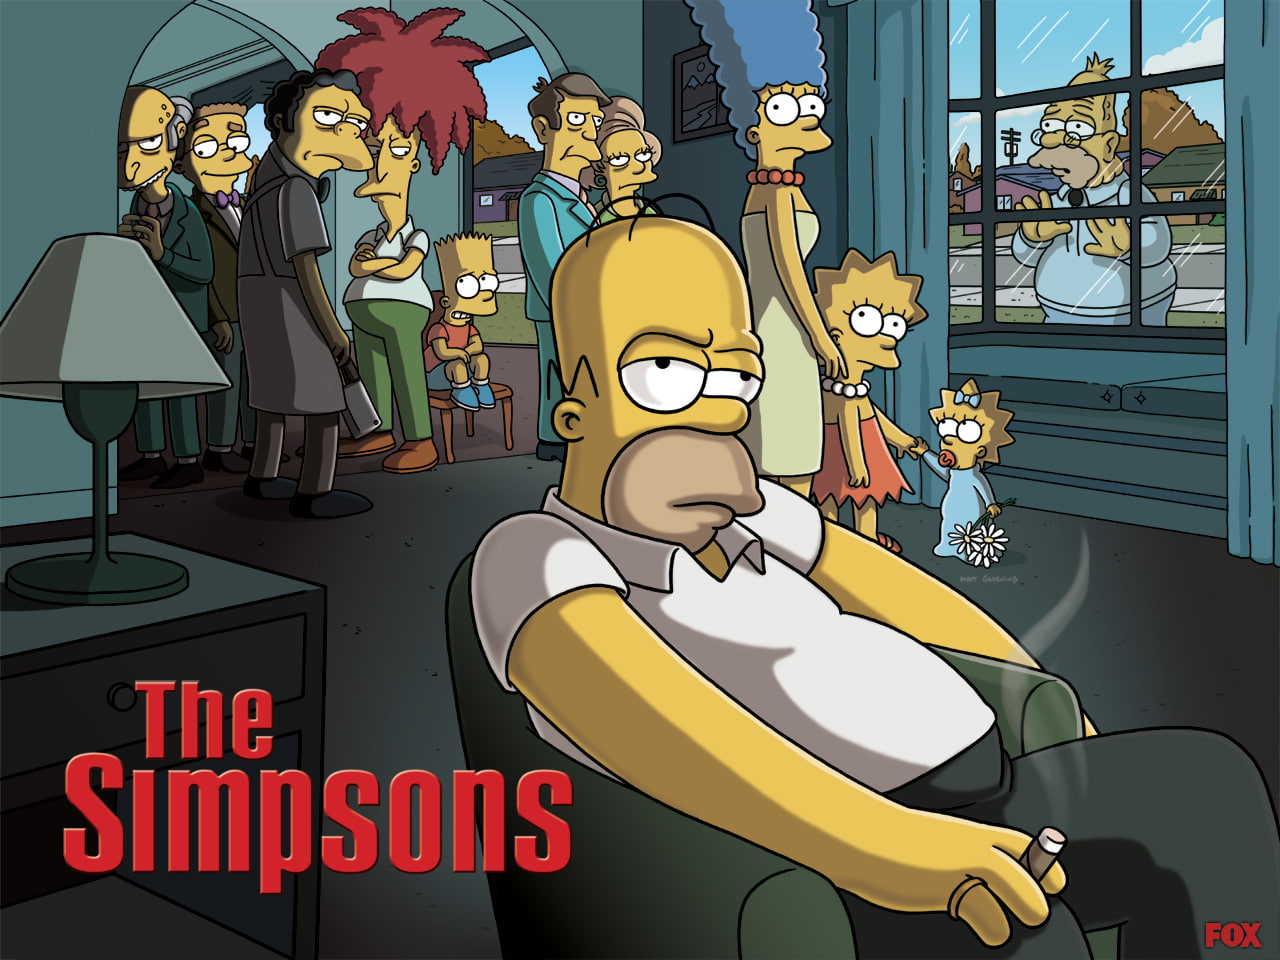 The Simpsons The Sopranos HD, the simpsons poster, cartoon/comic